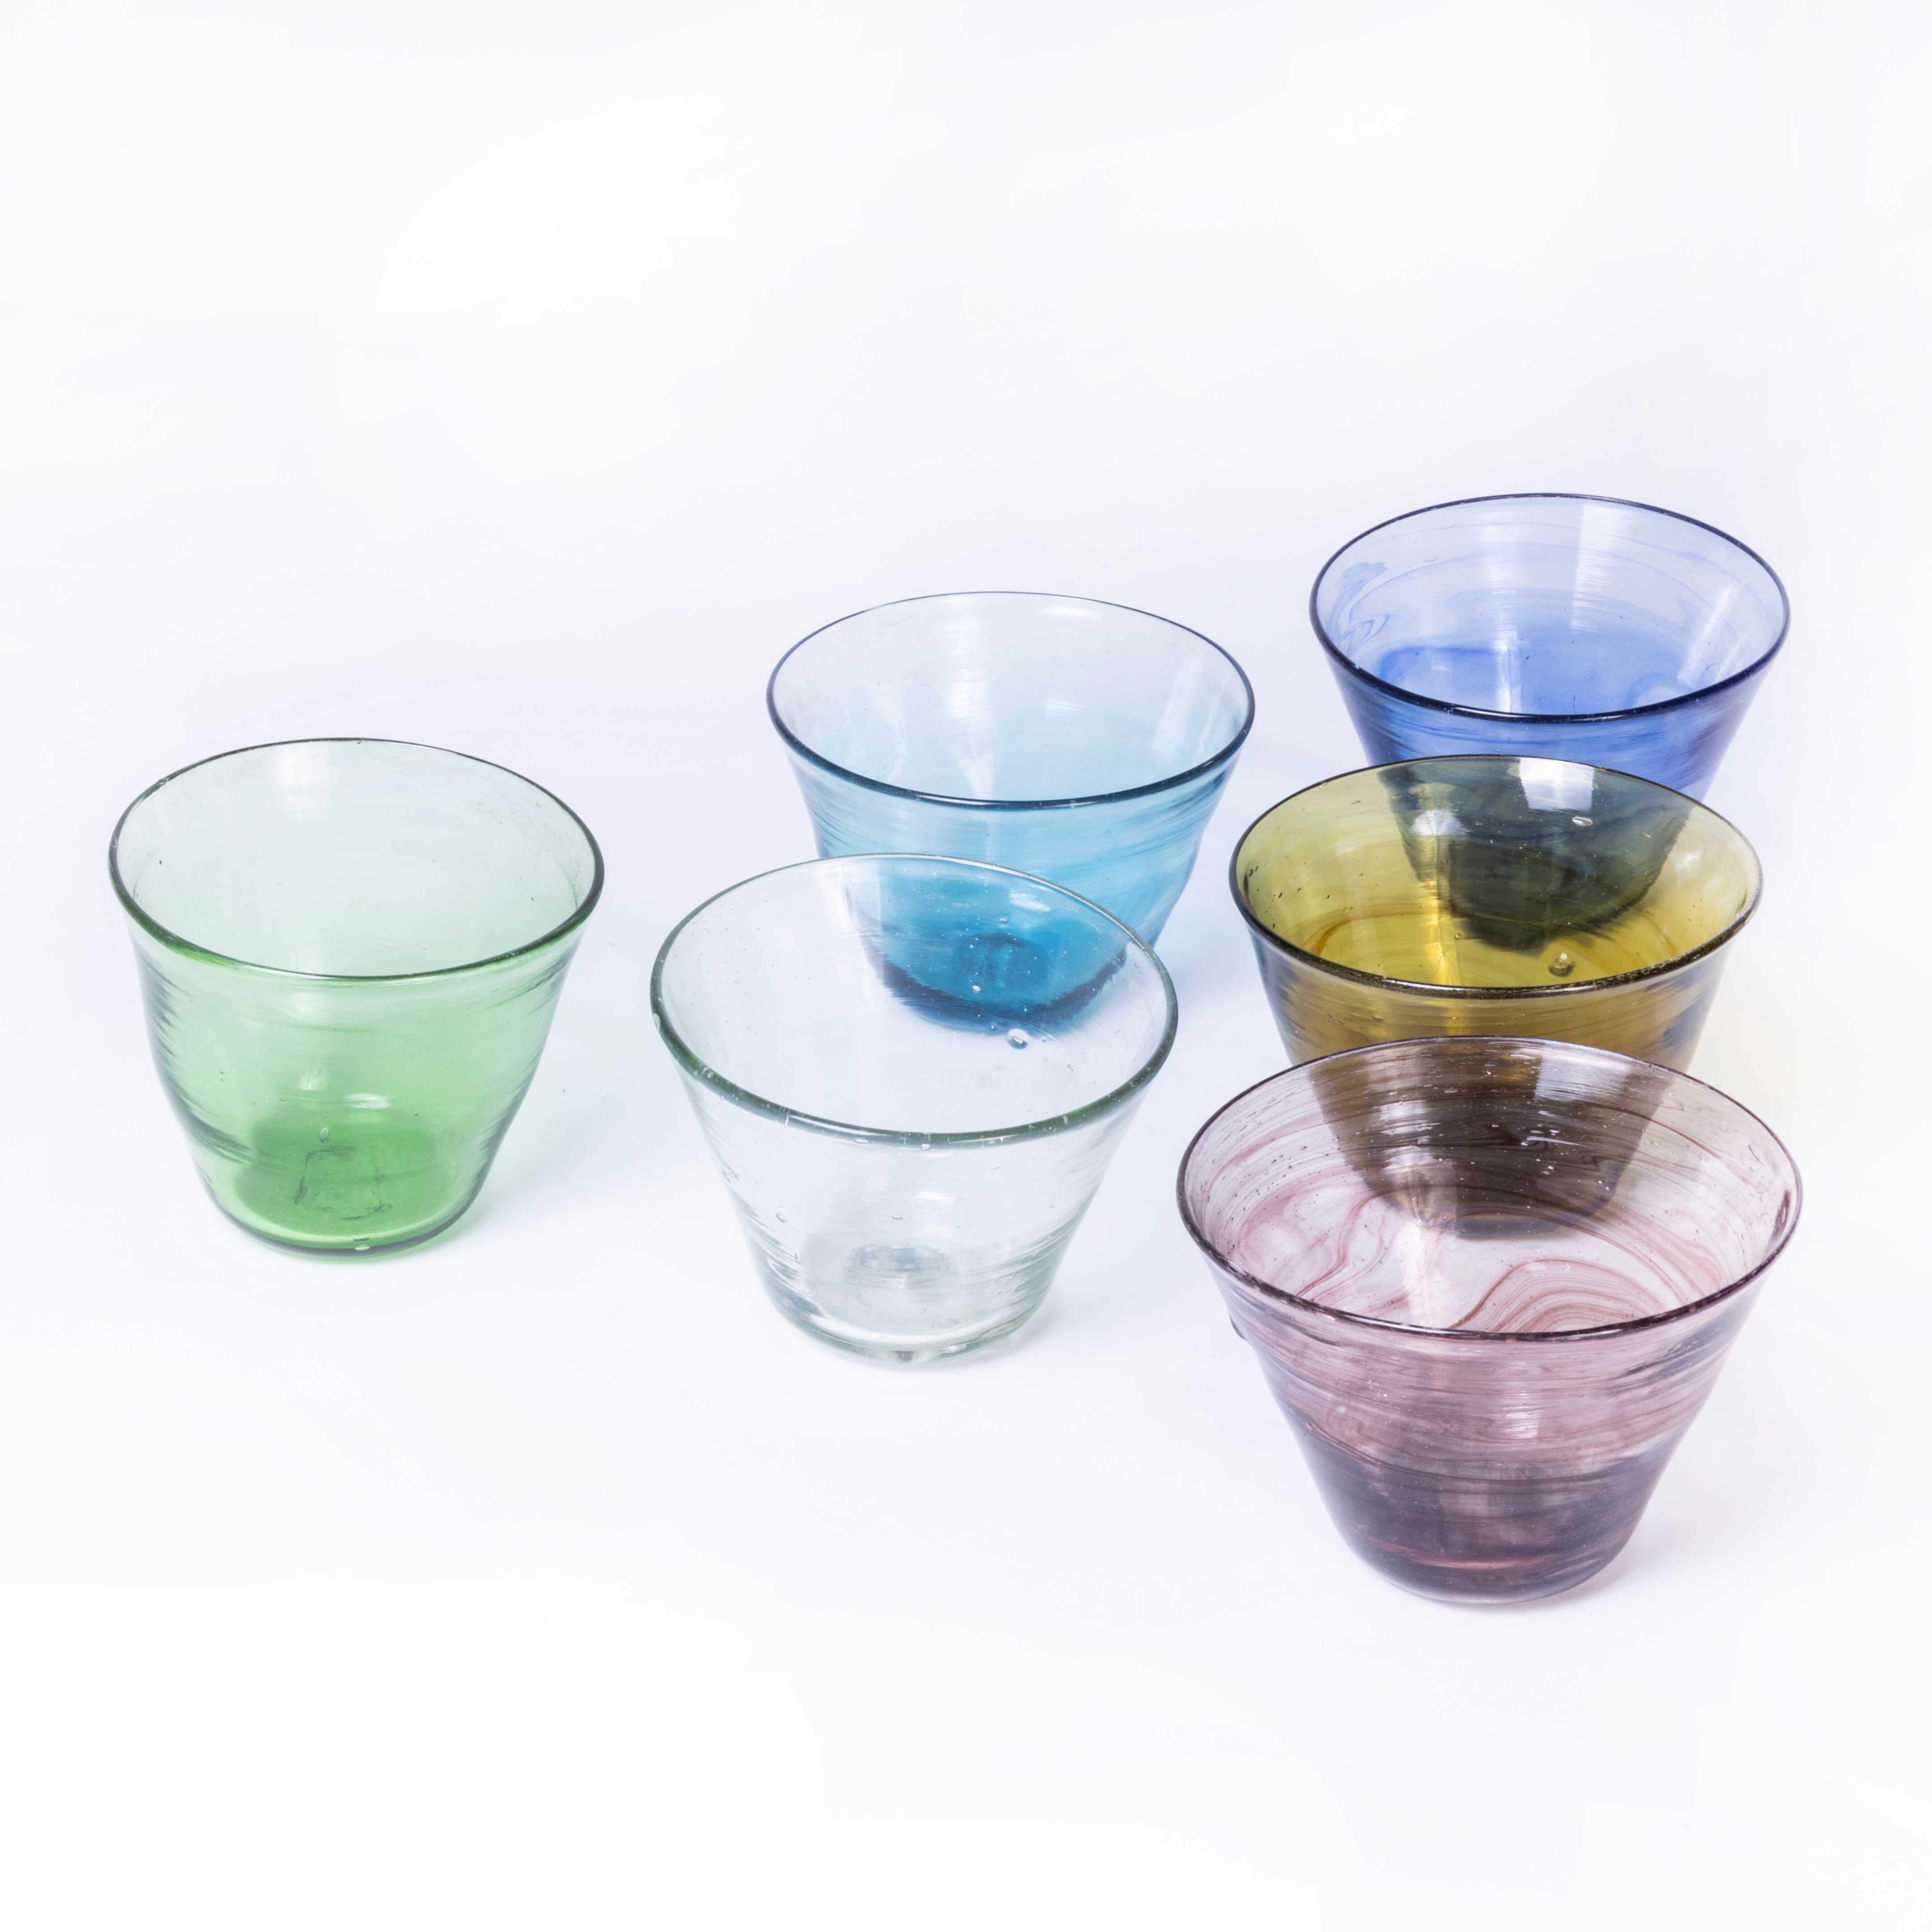 Hand Made Moroccan glass bowl – set of six
Hand Made Moroccan glass bowl – set of six. Hand-made in Morocco. The glass is mouth blown in a wonderful artisan quality. Because of the artisan production the colours can vary so we are selling the bowls